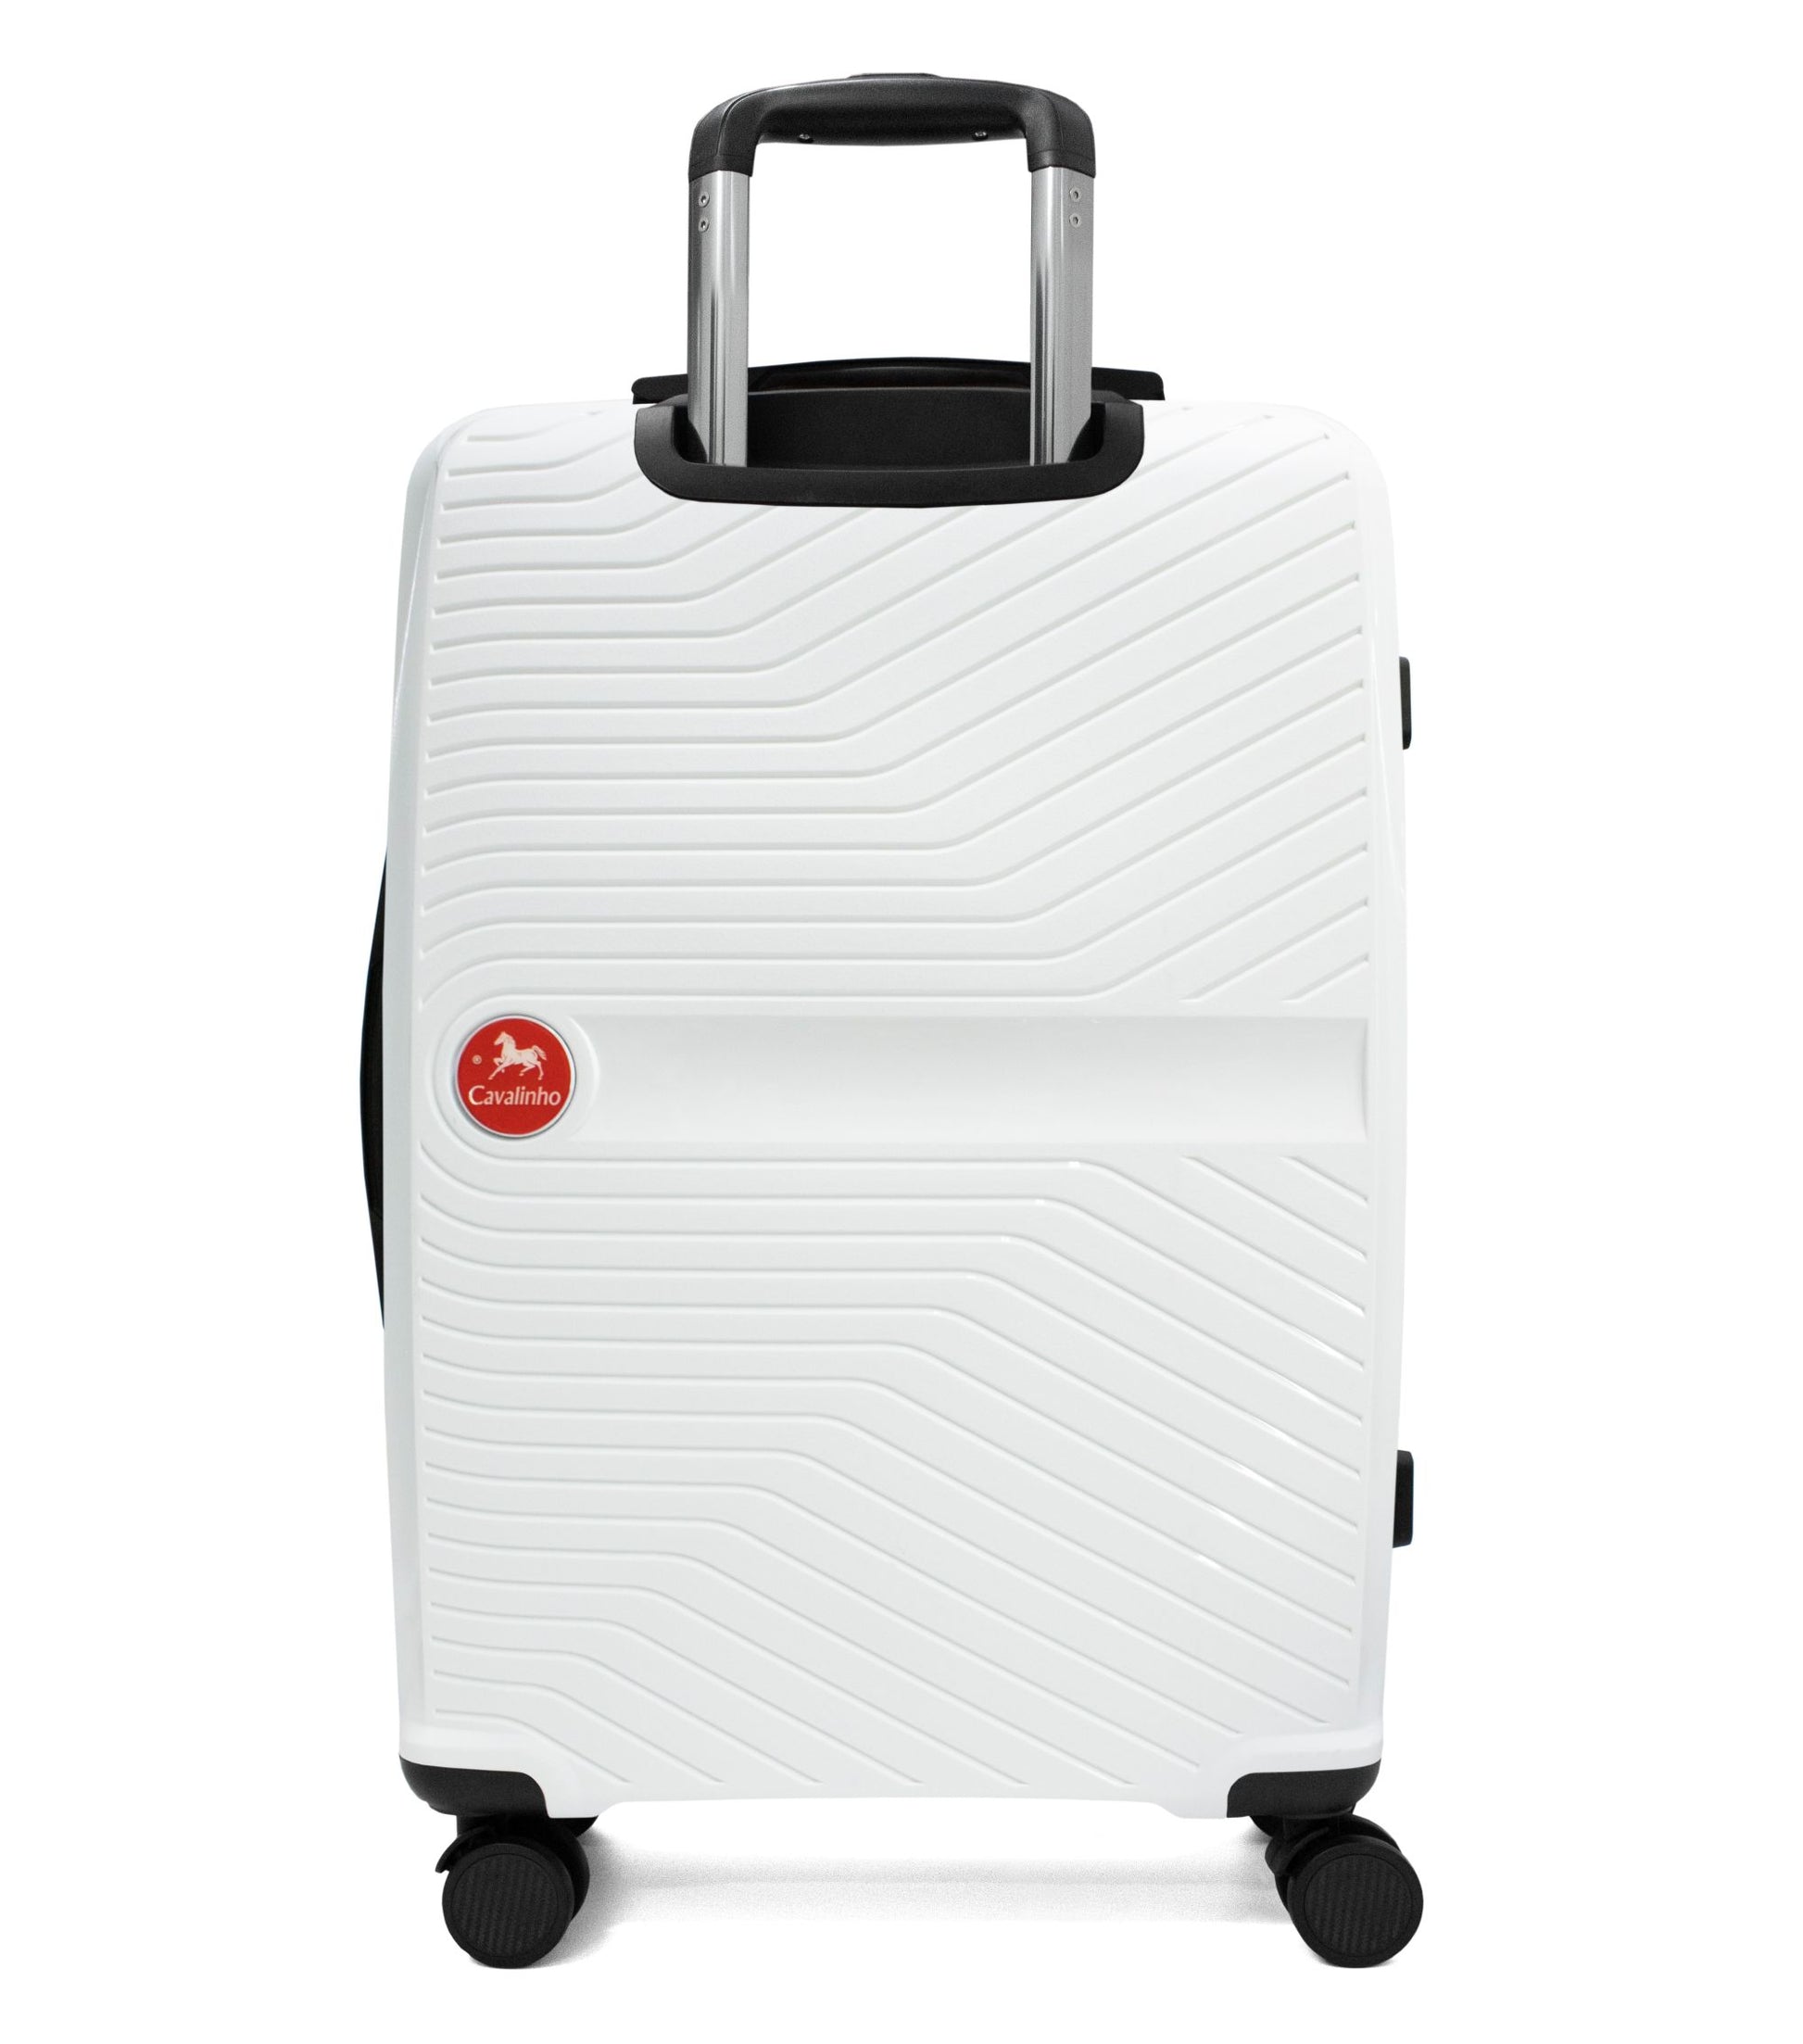 Cavalinho Colorful Check-in Hardside Luggage (24") - 24 inch White - 68020004.06.24_3